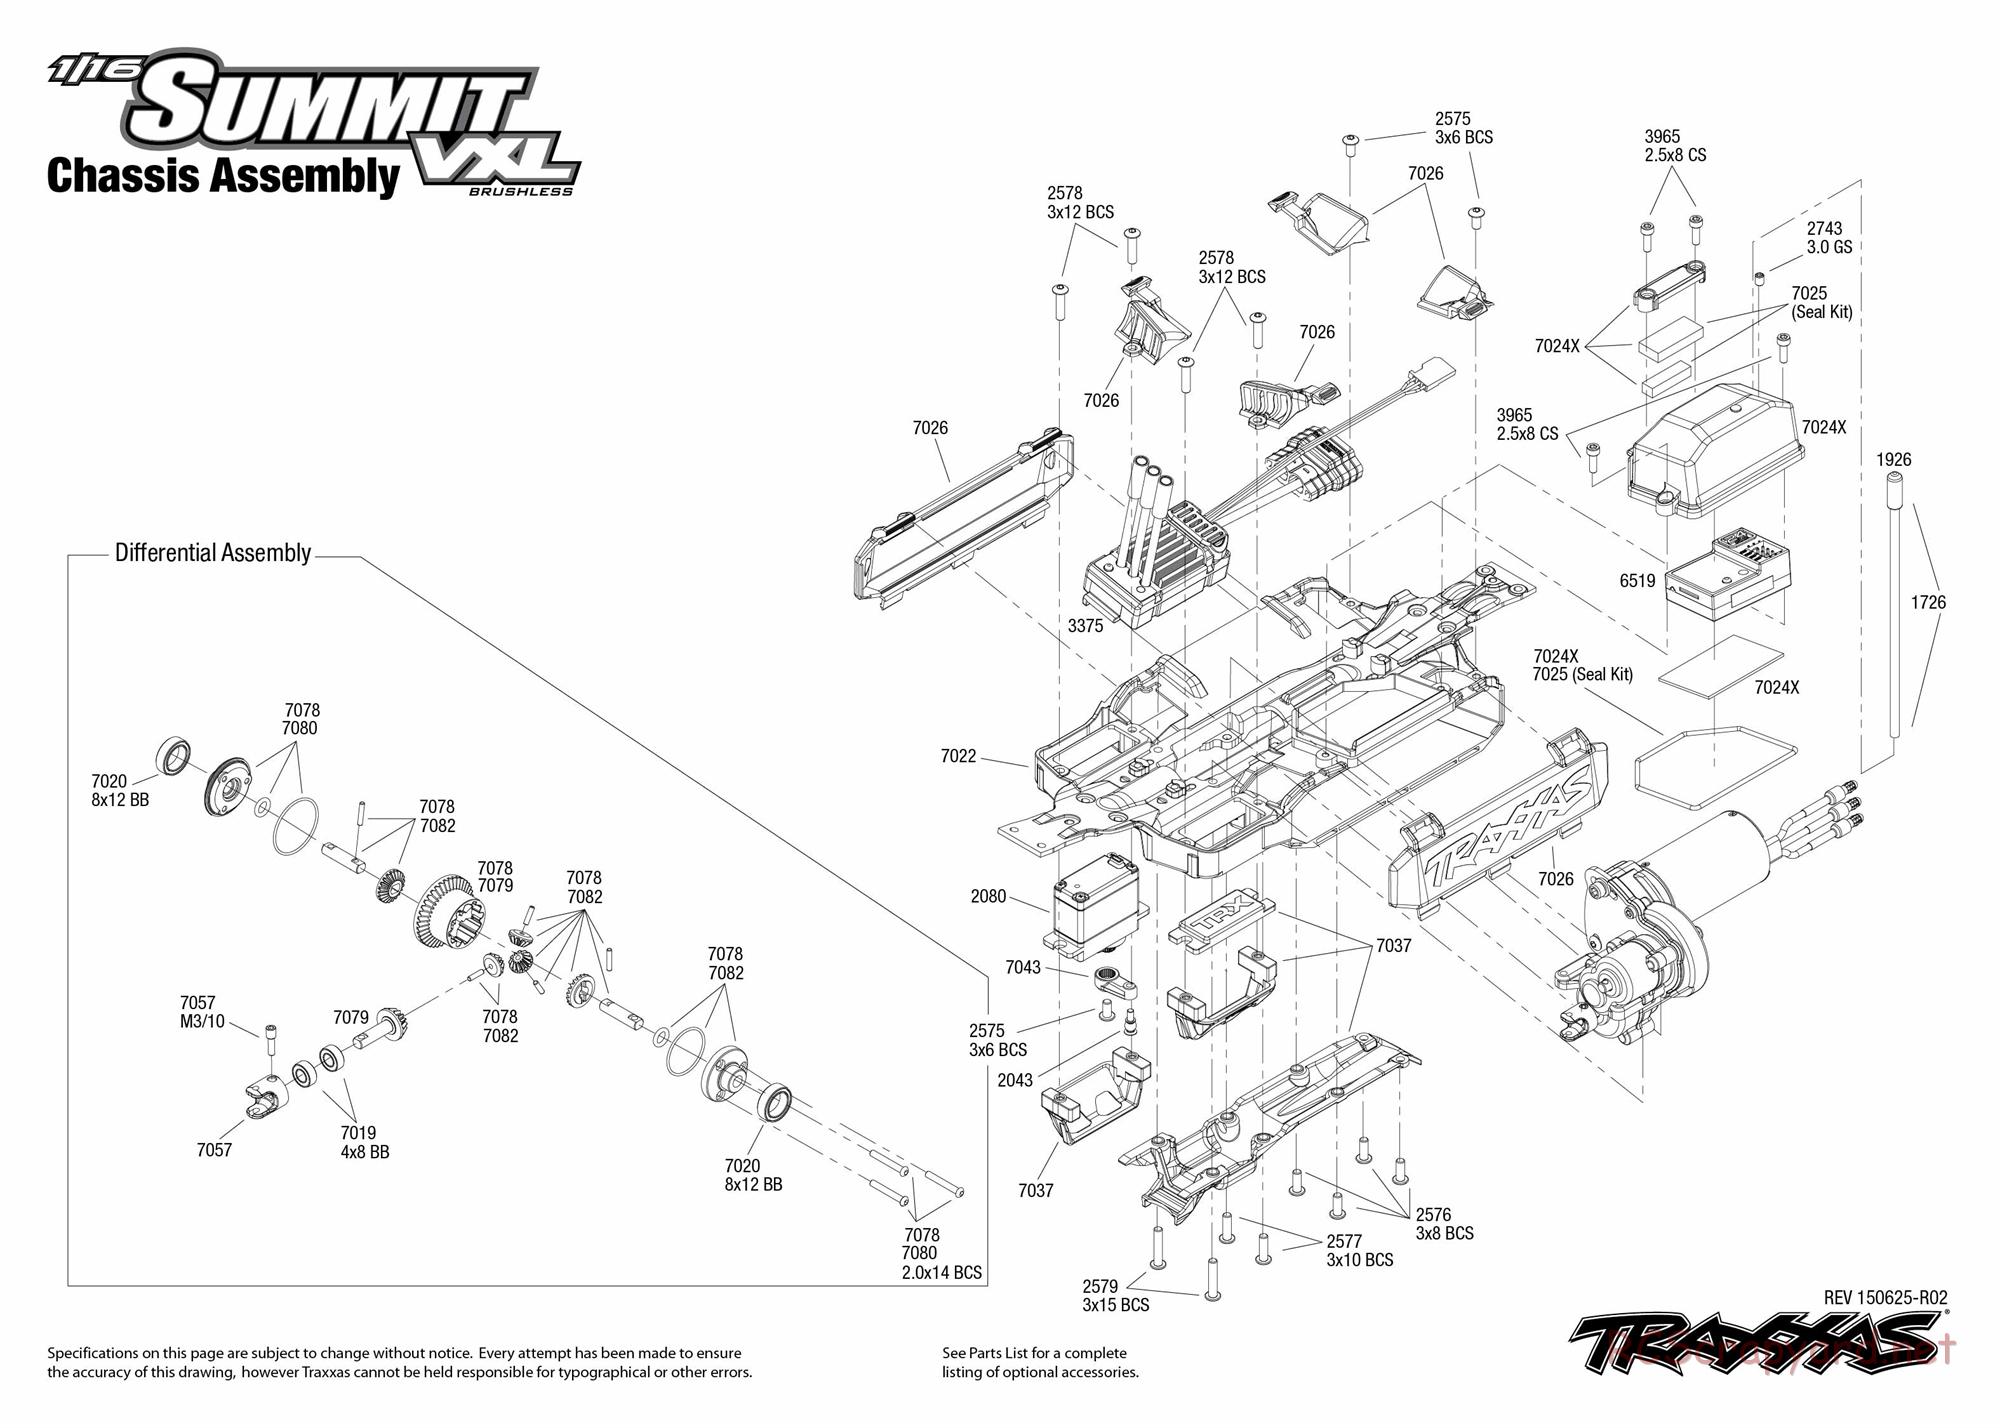 Traxxas - 1/16 Summit VXL (2015) - Exploded Views - Page 1